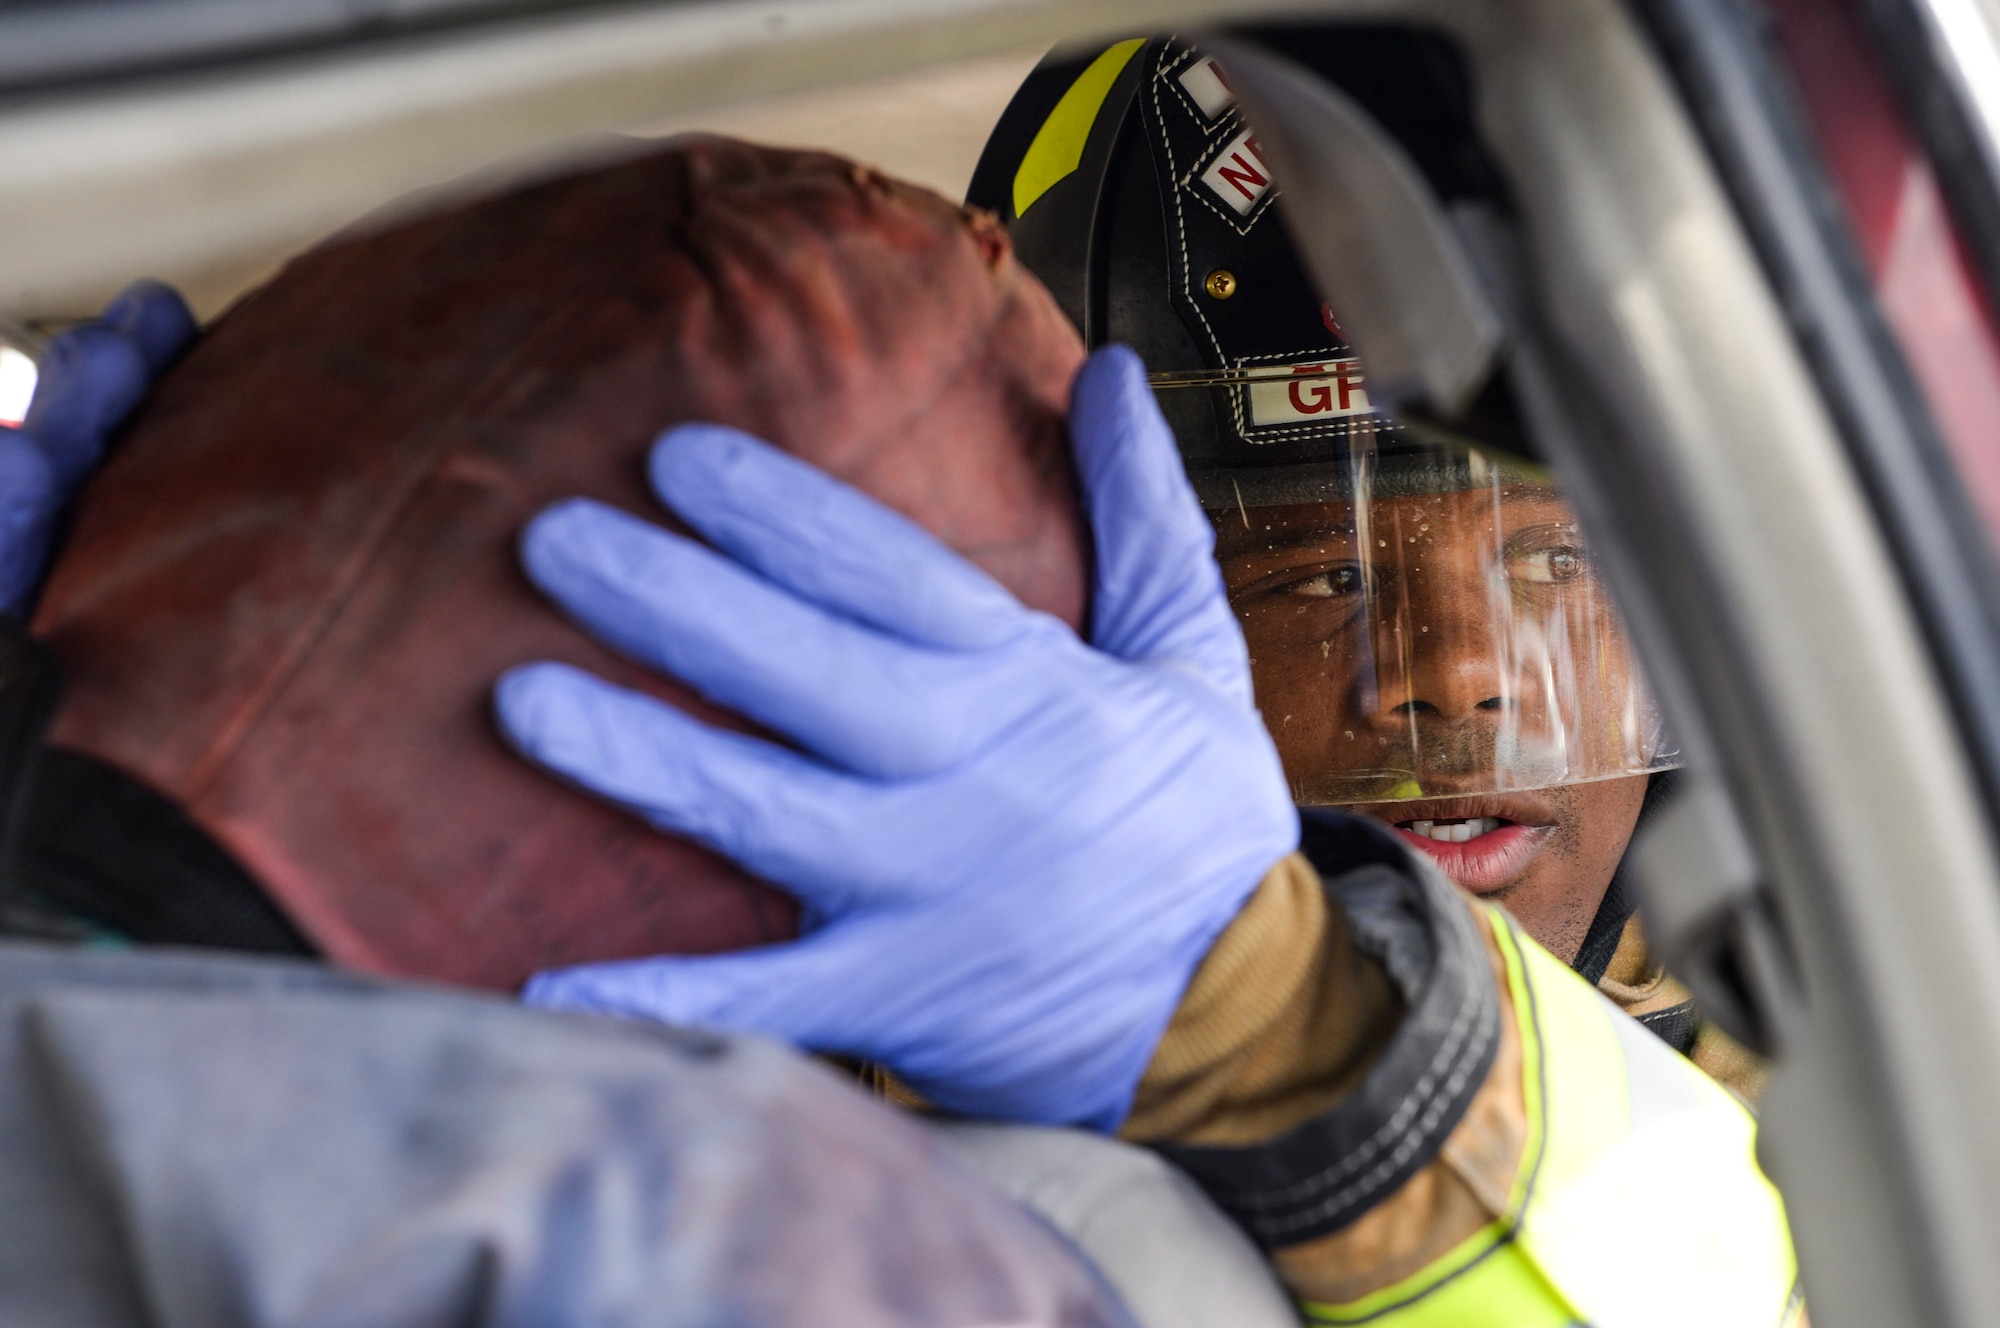 A firefighter from the 99th Civil Engineer Squadron stabilizes the head of a simulated car crash victim at Nellis Air Force Base, Nev., May 17, 2017. The simulation required vehicle operators from the 99th Logistics Readiness Squadron to flip an overturned vehicle. Firefighters then arrived on scene to evacuate the driver by cutting the roof off the crashed vehicle. (U.S. Air Force photo by Airman 1st Class Andrew D. Sarver/Released)